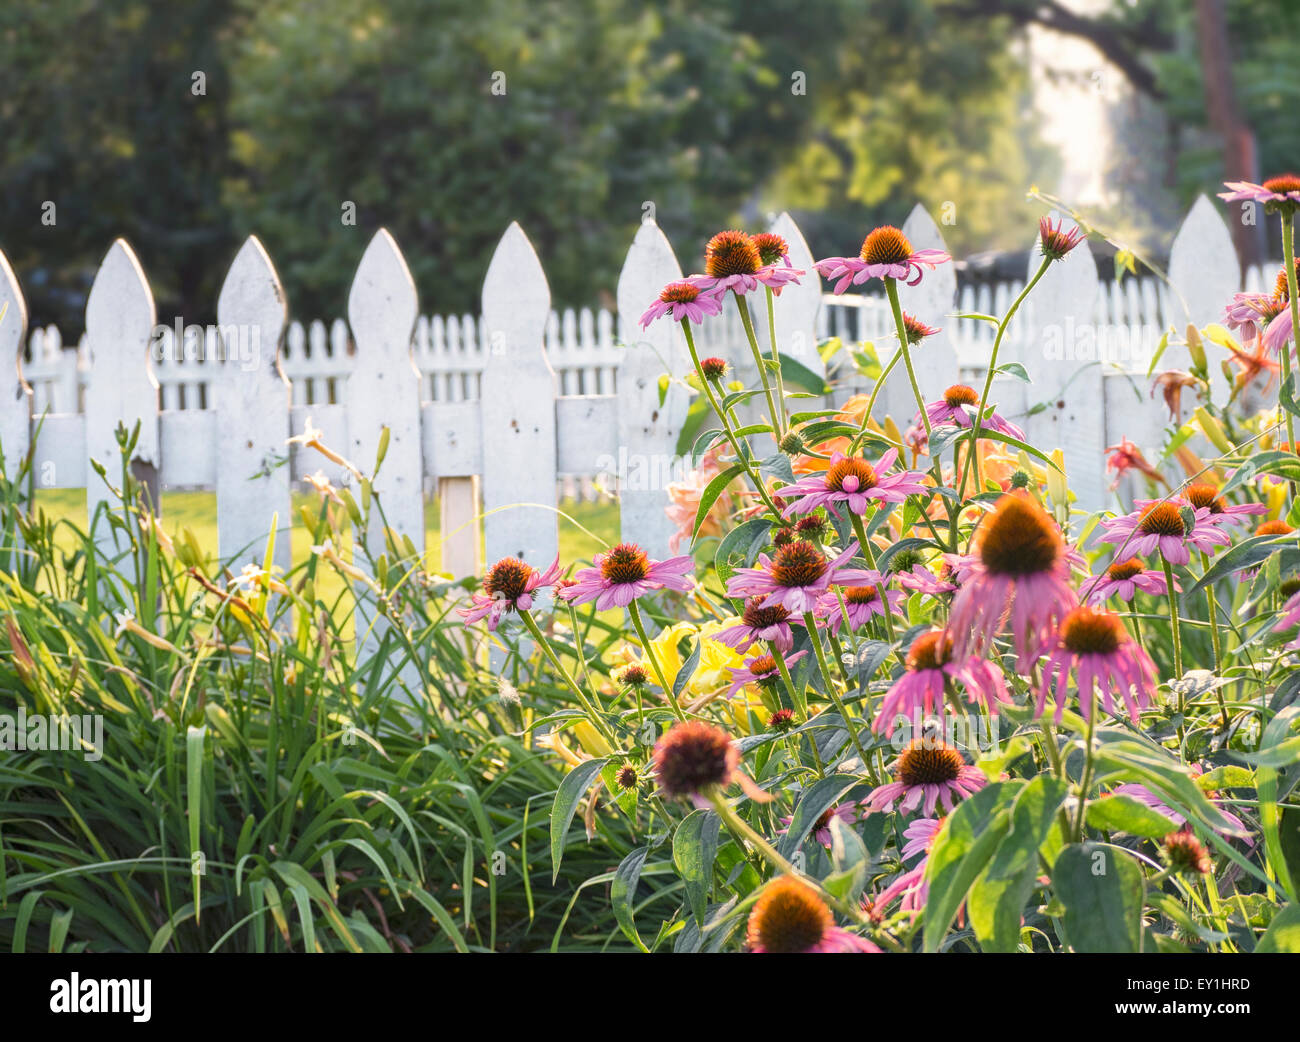 Coneflowers (Echinacea) bloom on a summer day in a garden with a white picket fence. It is used in holistic healing remedies. Stock Photo